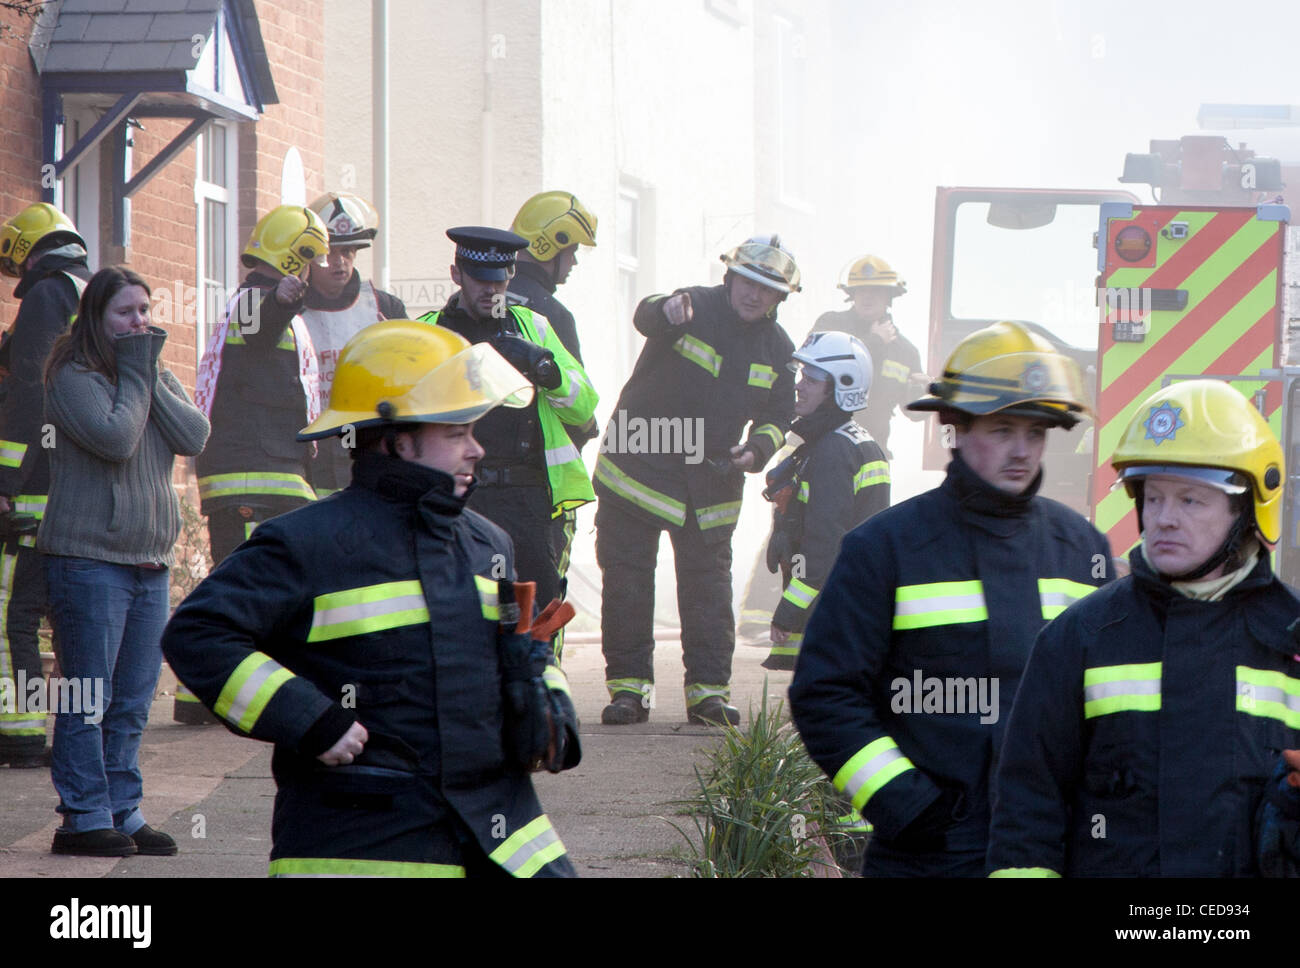 Fire fighters at a fire in a row of thatched cottages in Crediton, Devon Stock Photo